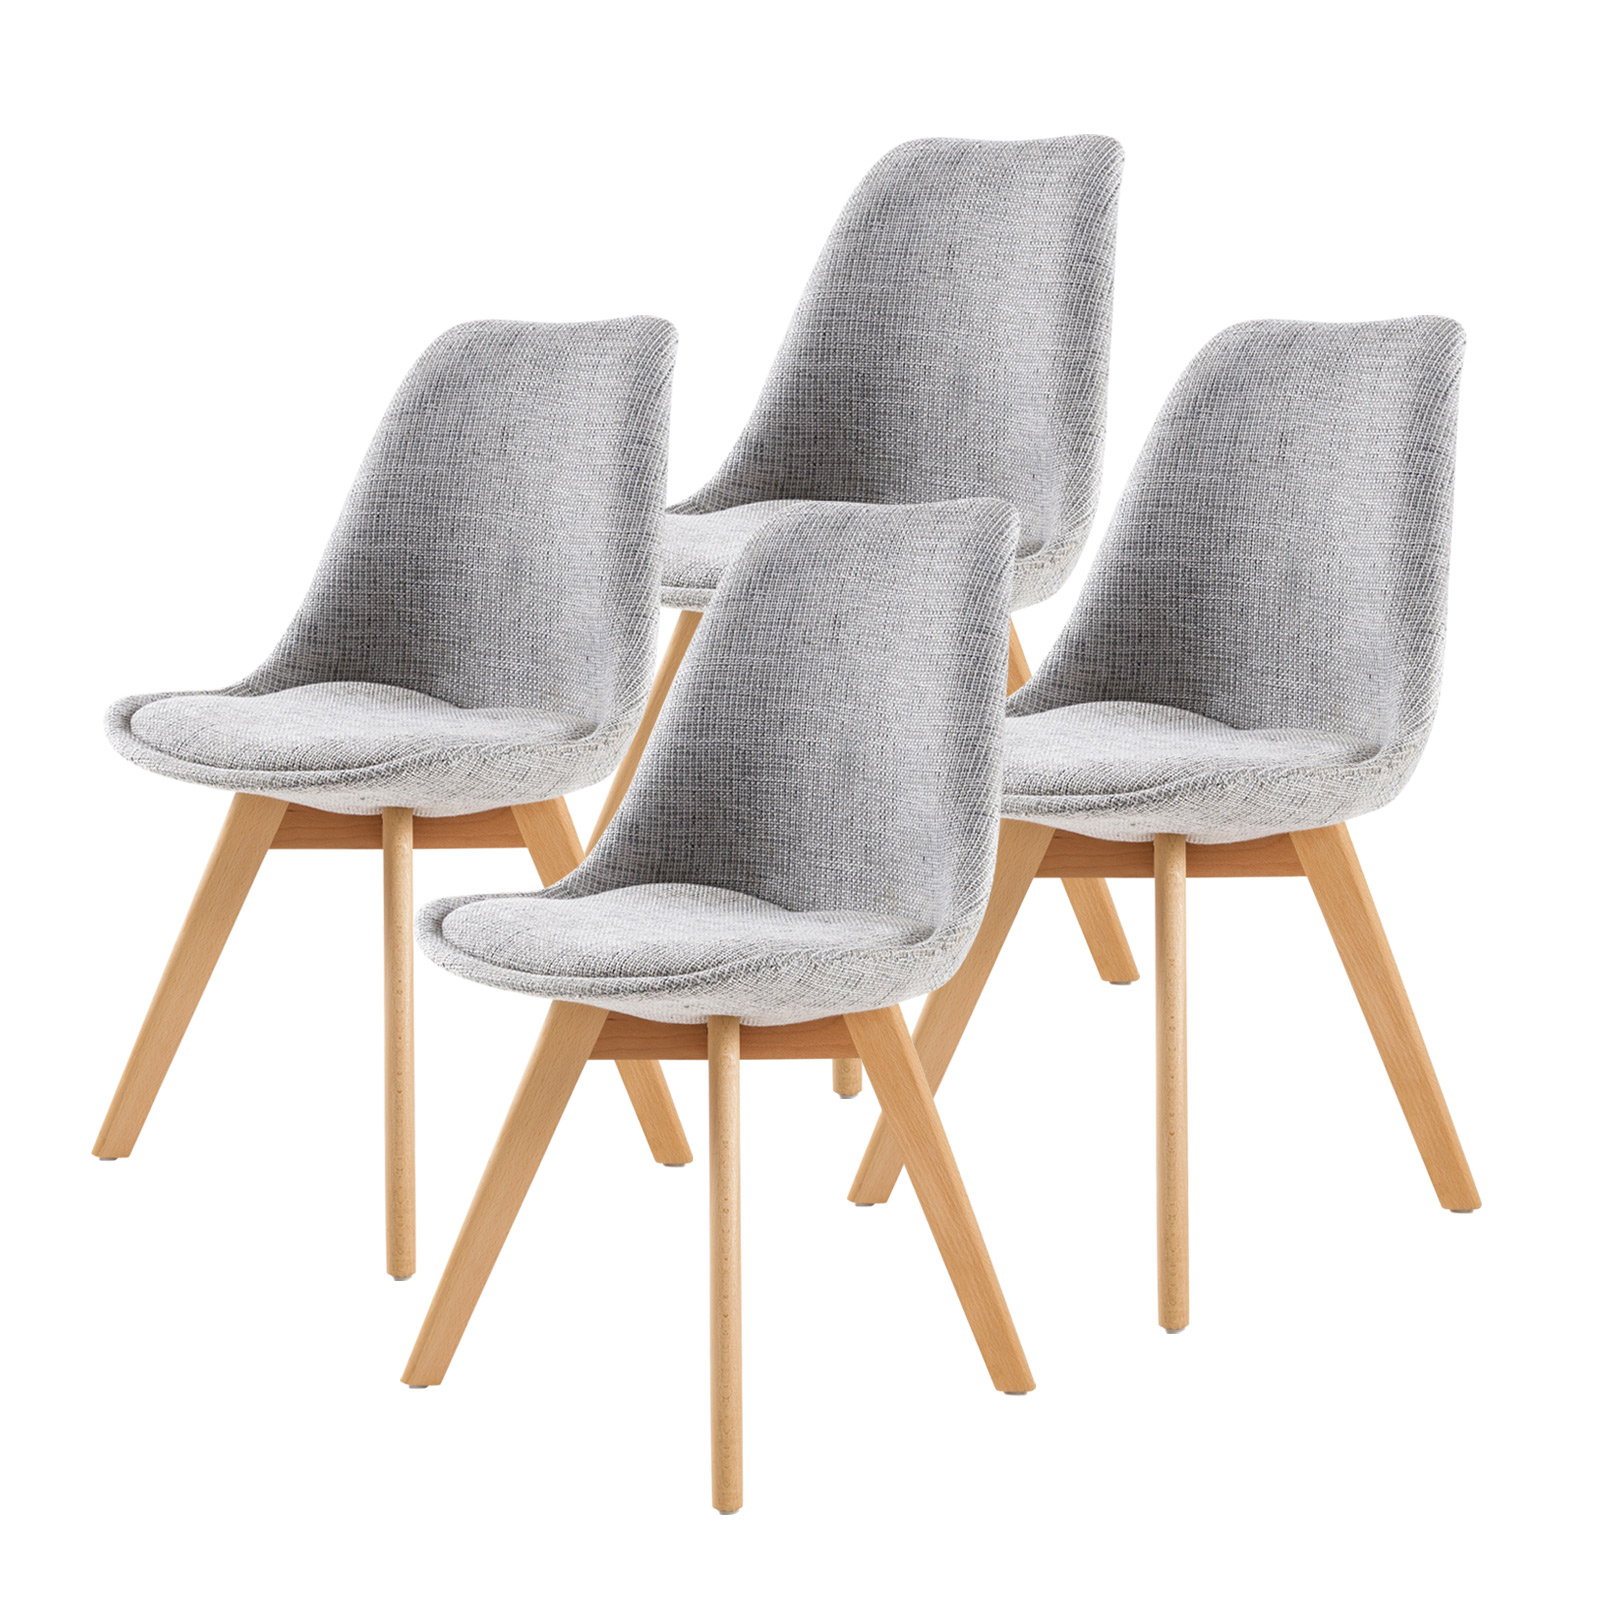 4X Padded Seat Dining Chair Fabric - GREY